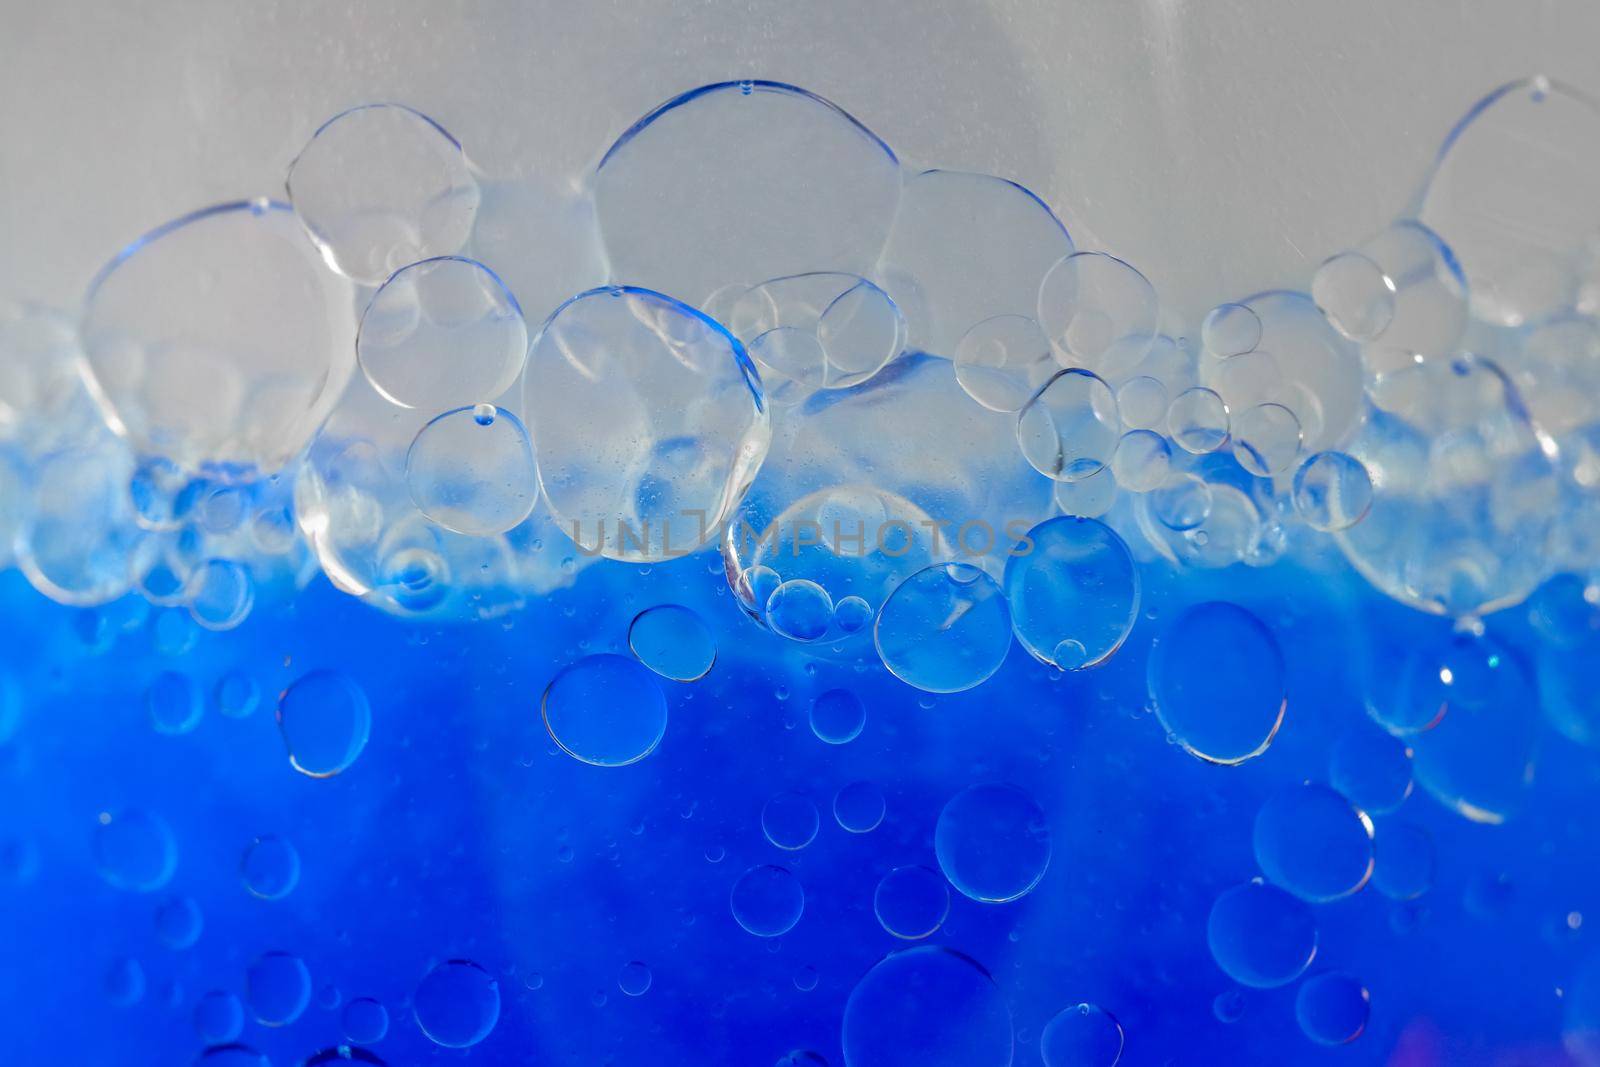 air bubbles in blue shampoos as background by roman112007